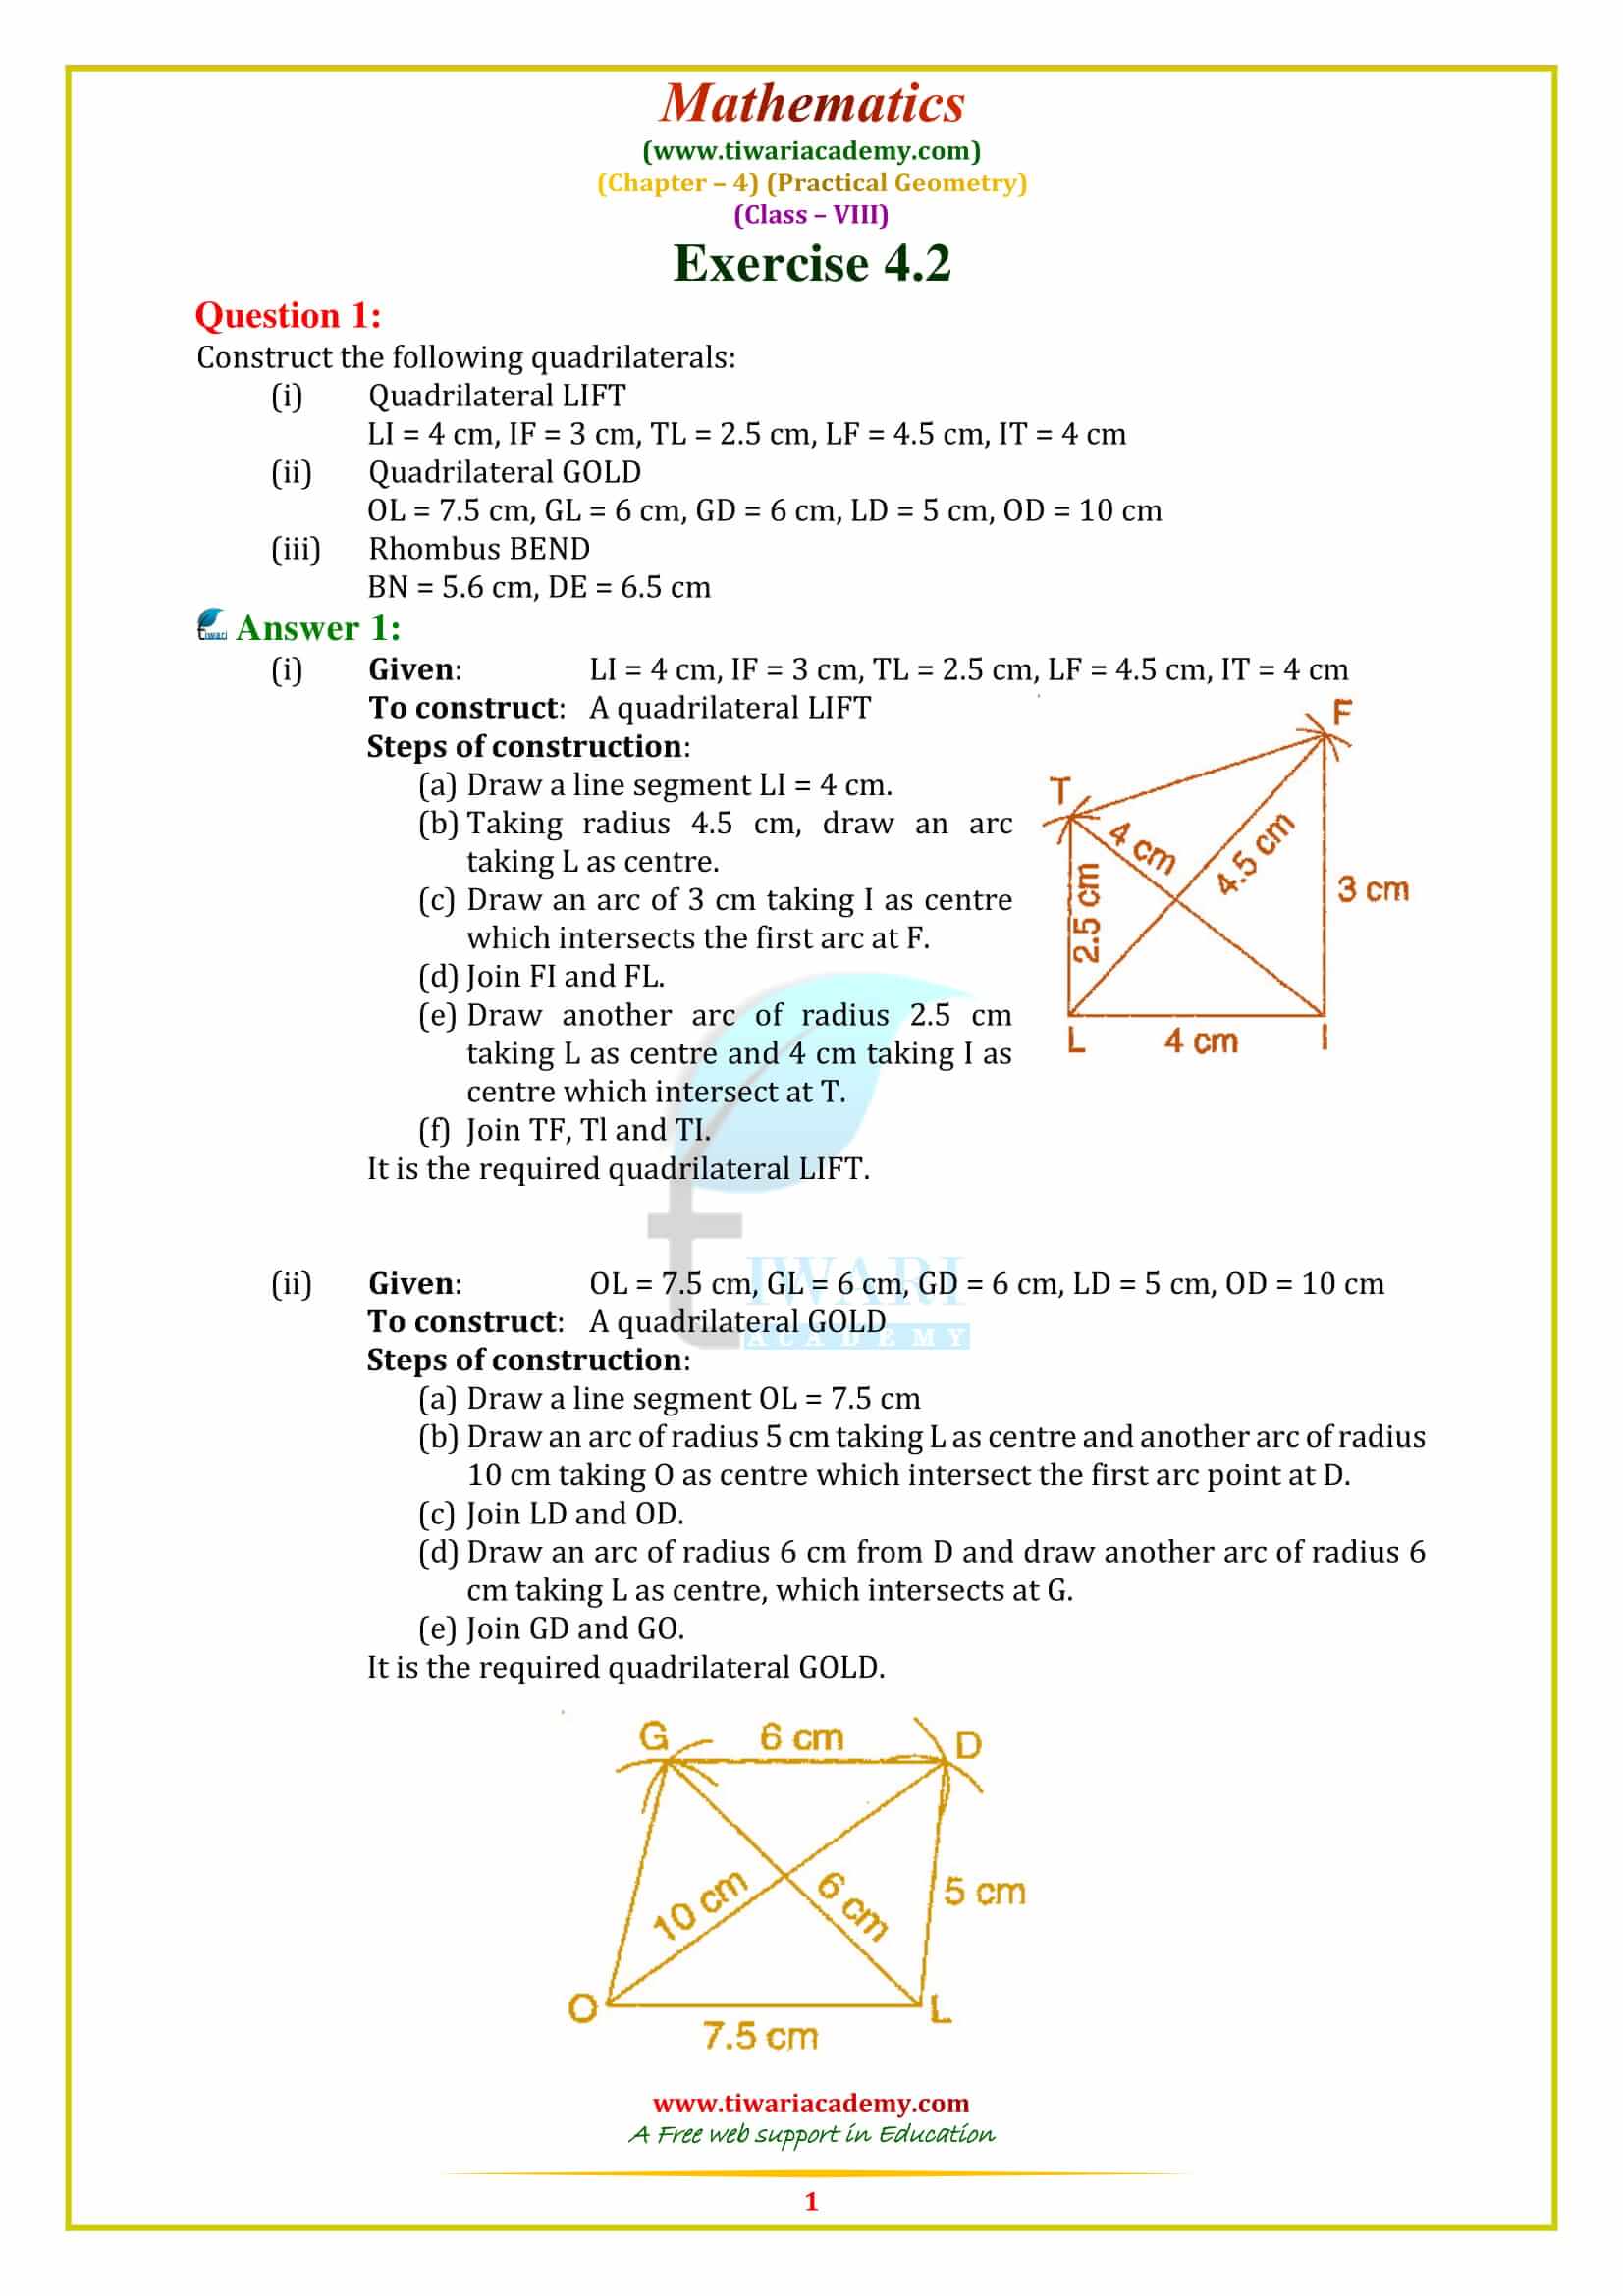 NCERT Solutions for Class 8 Maths Chapter 4 Exercise 4.2 in pdf form